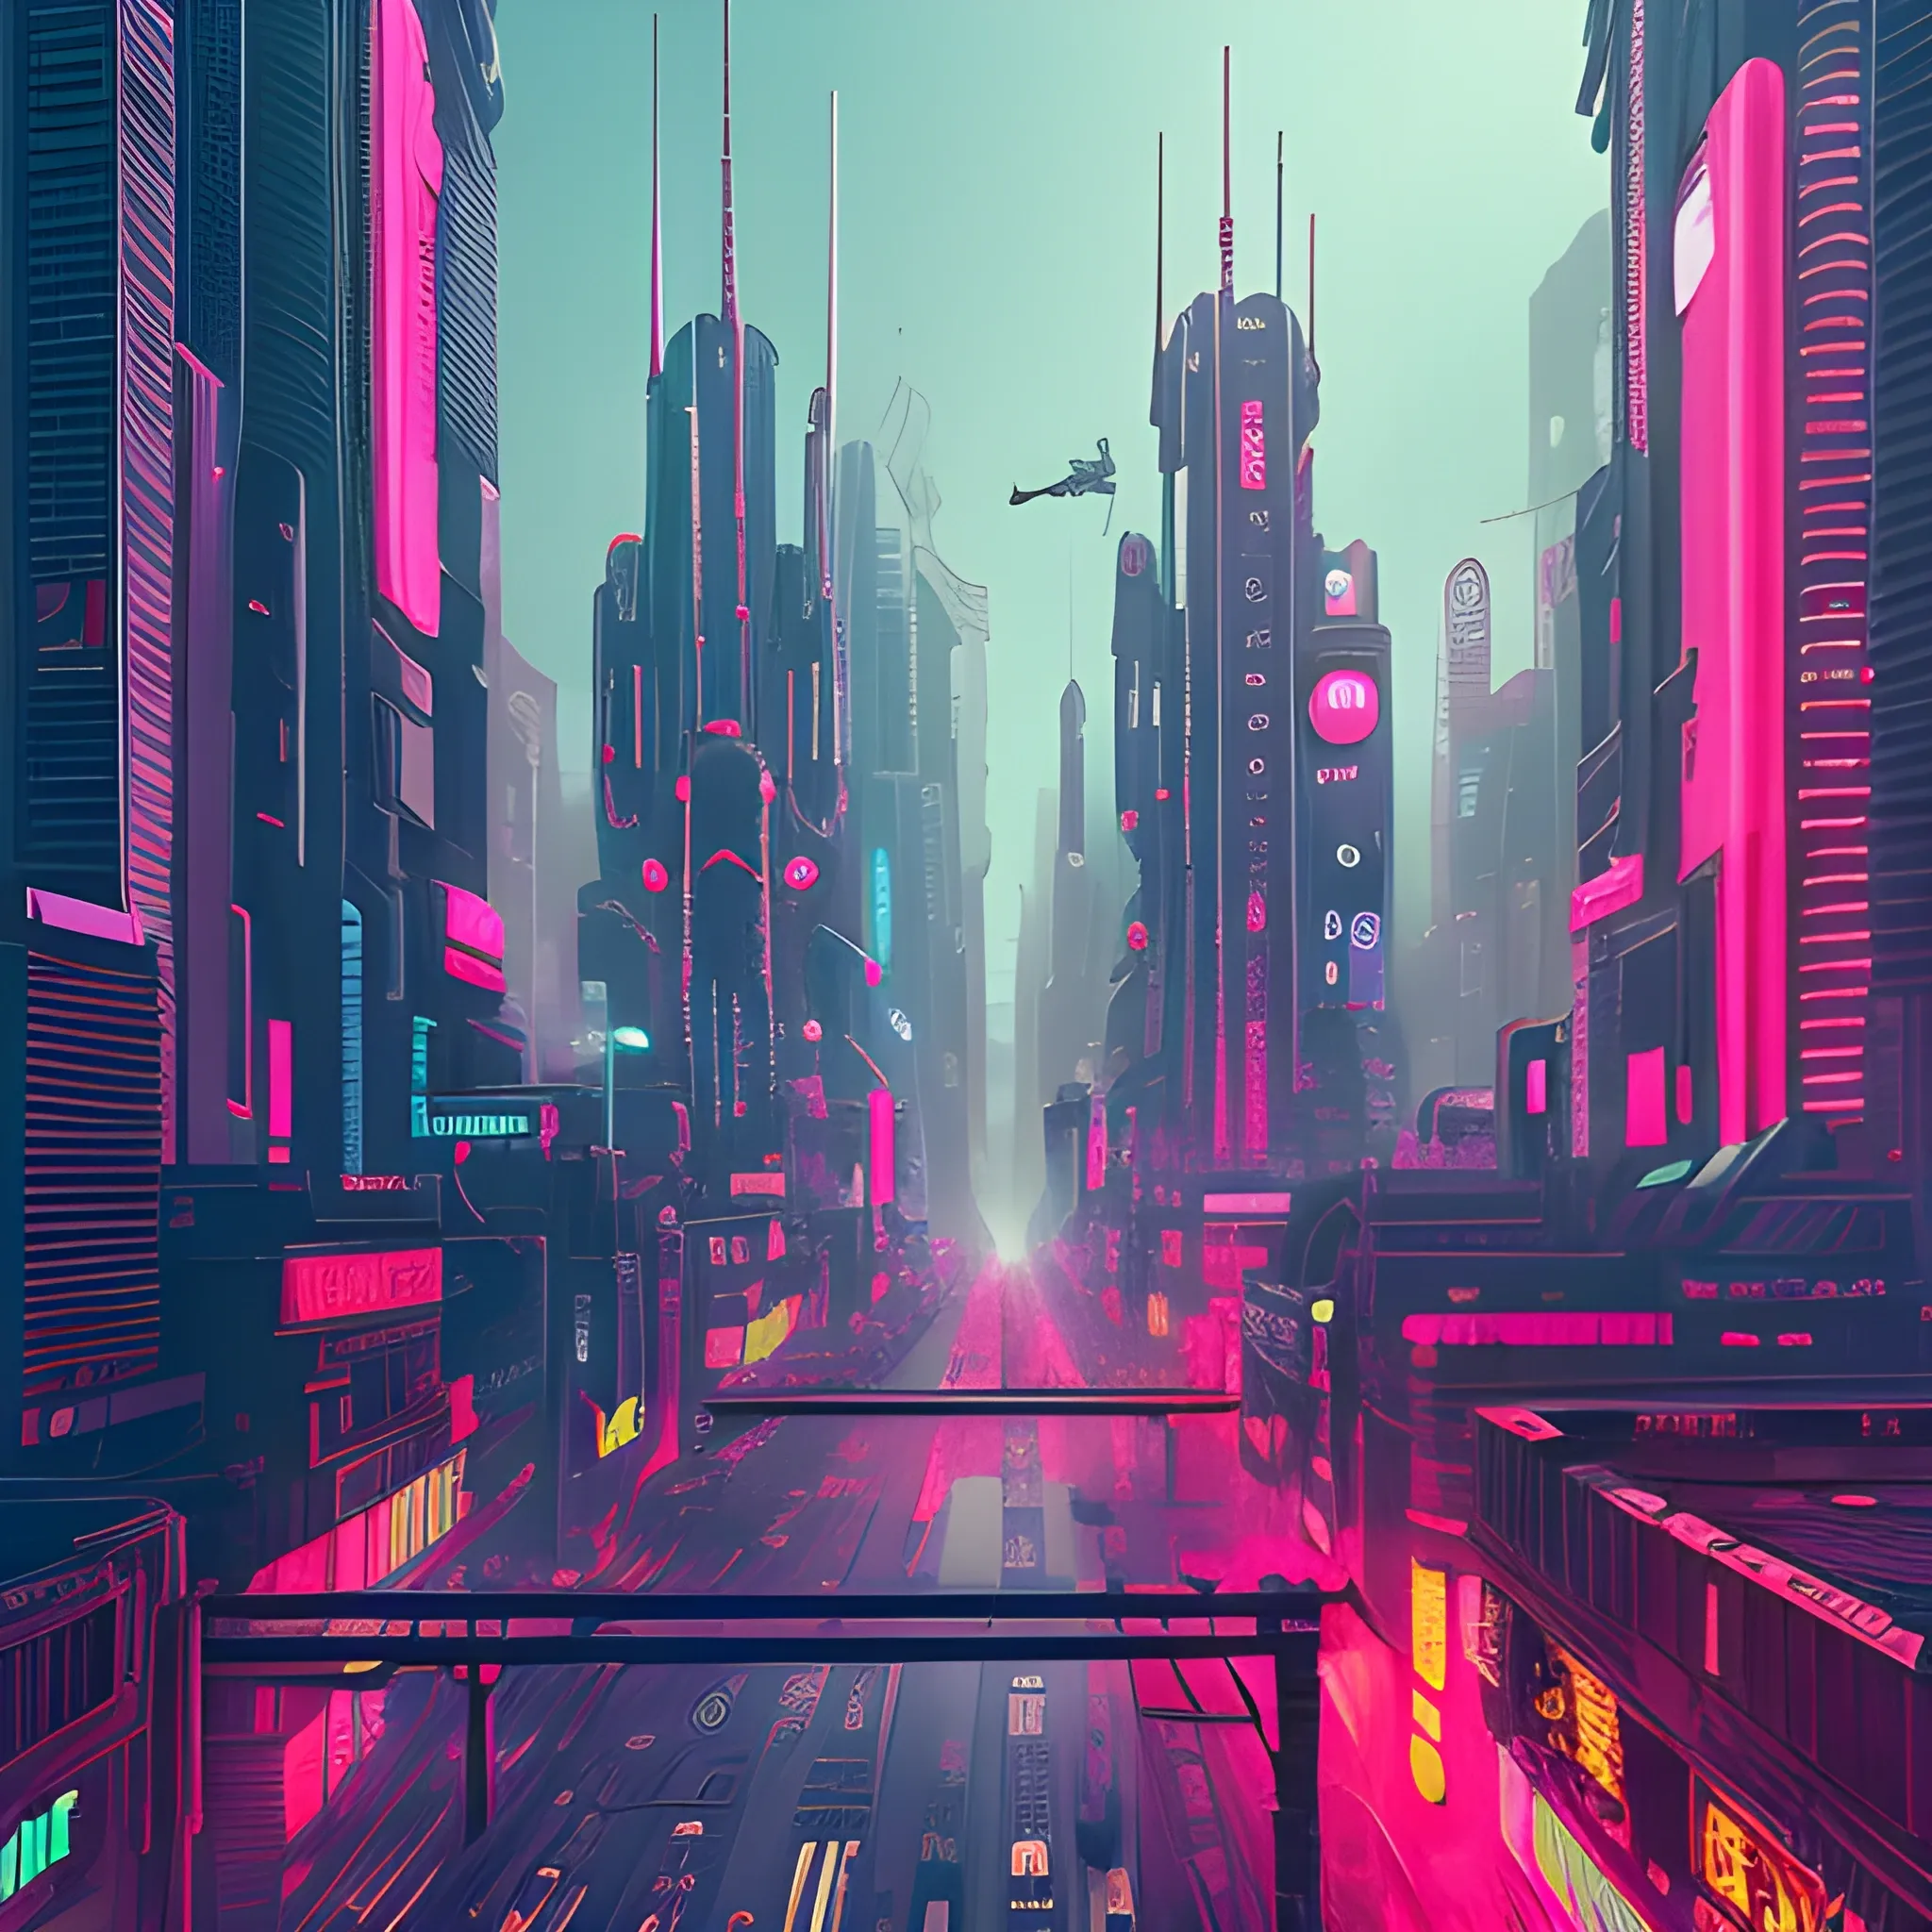 4k, beautiful, city, background of a cyberpunk by MAD DOG JONES, red color scheme, best illustration, no humans, no cars, vaporwave, realistic, dreamscape, incredible details, liminal space, highly detailed, cinematic ,rim lighting, trending on Behance HD

